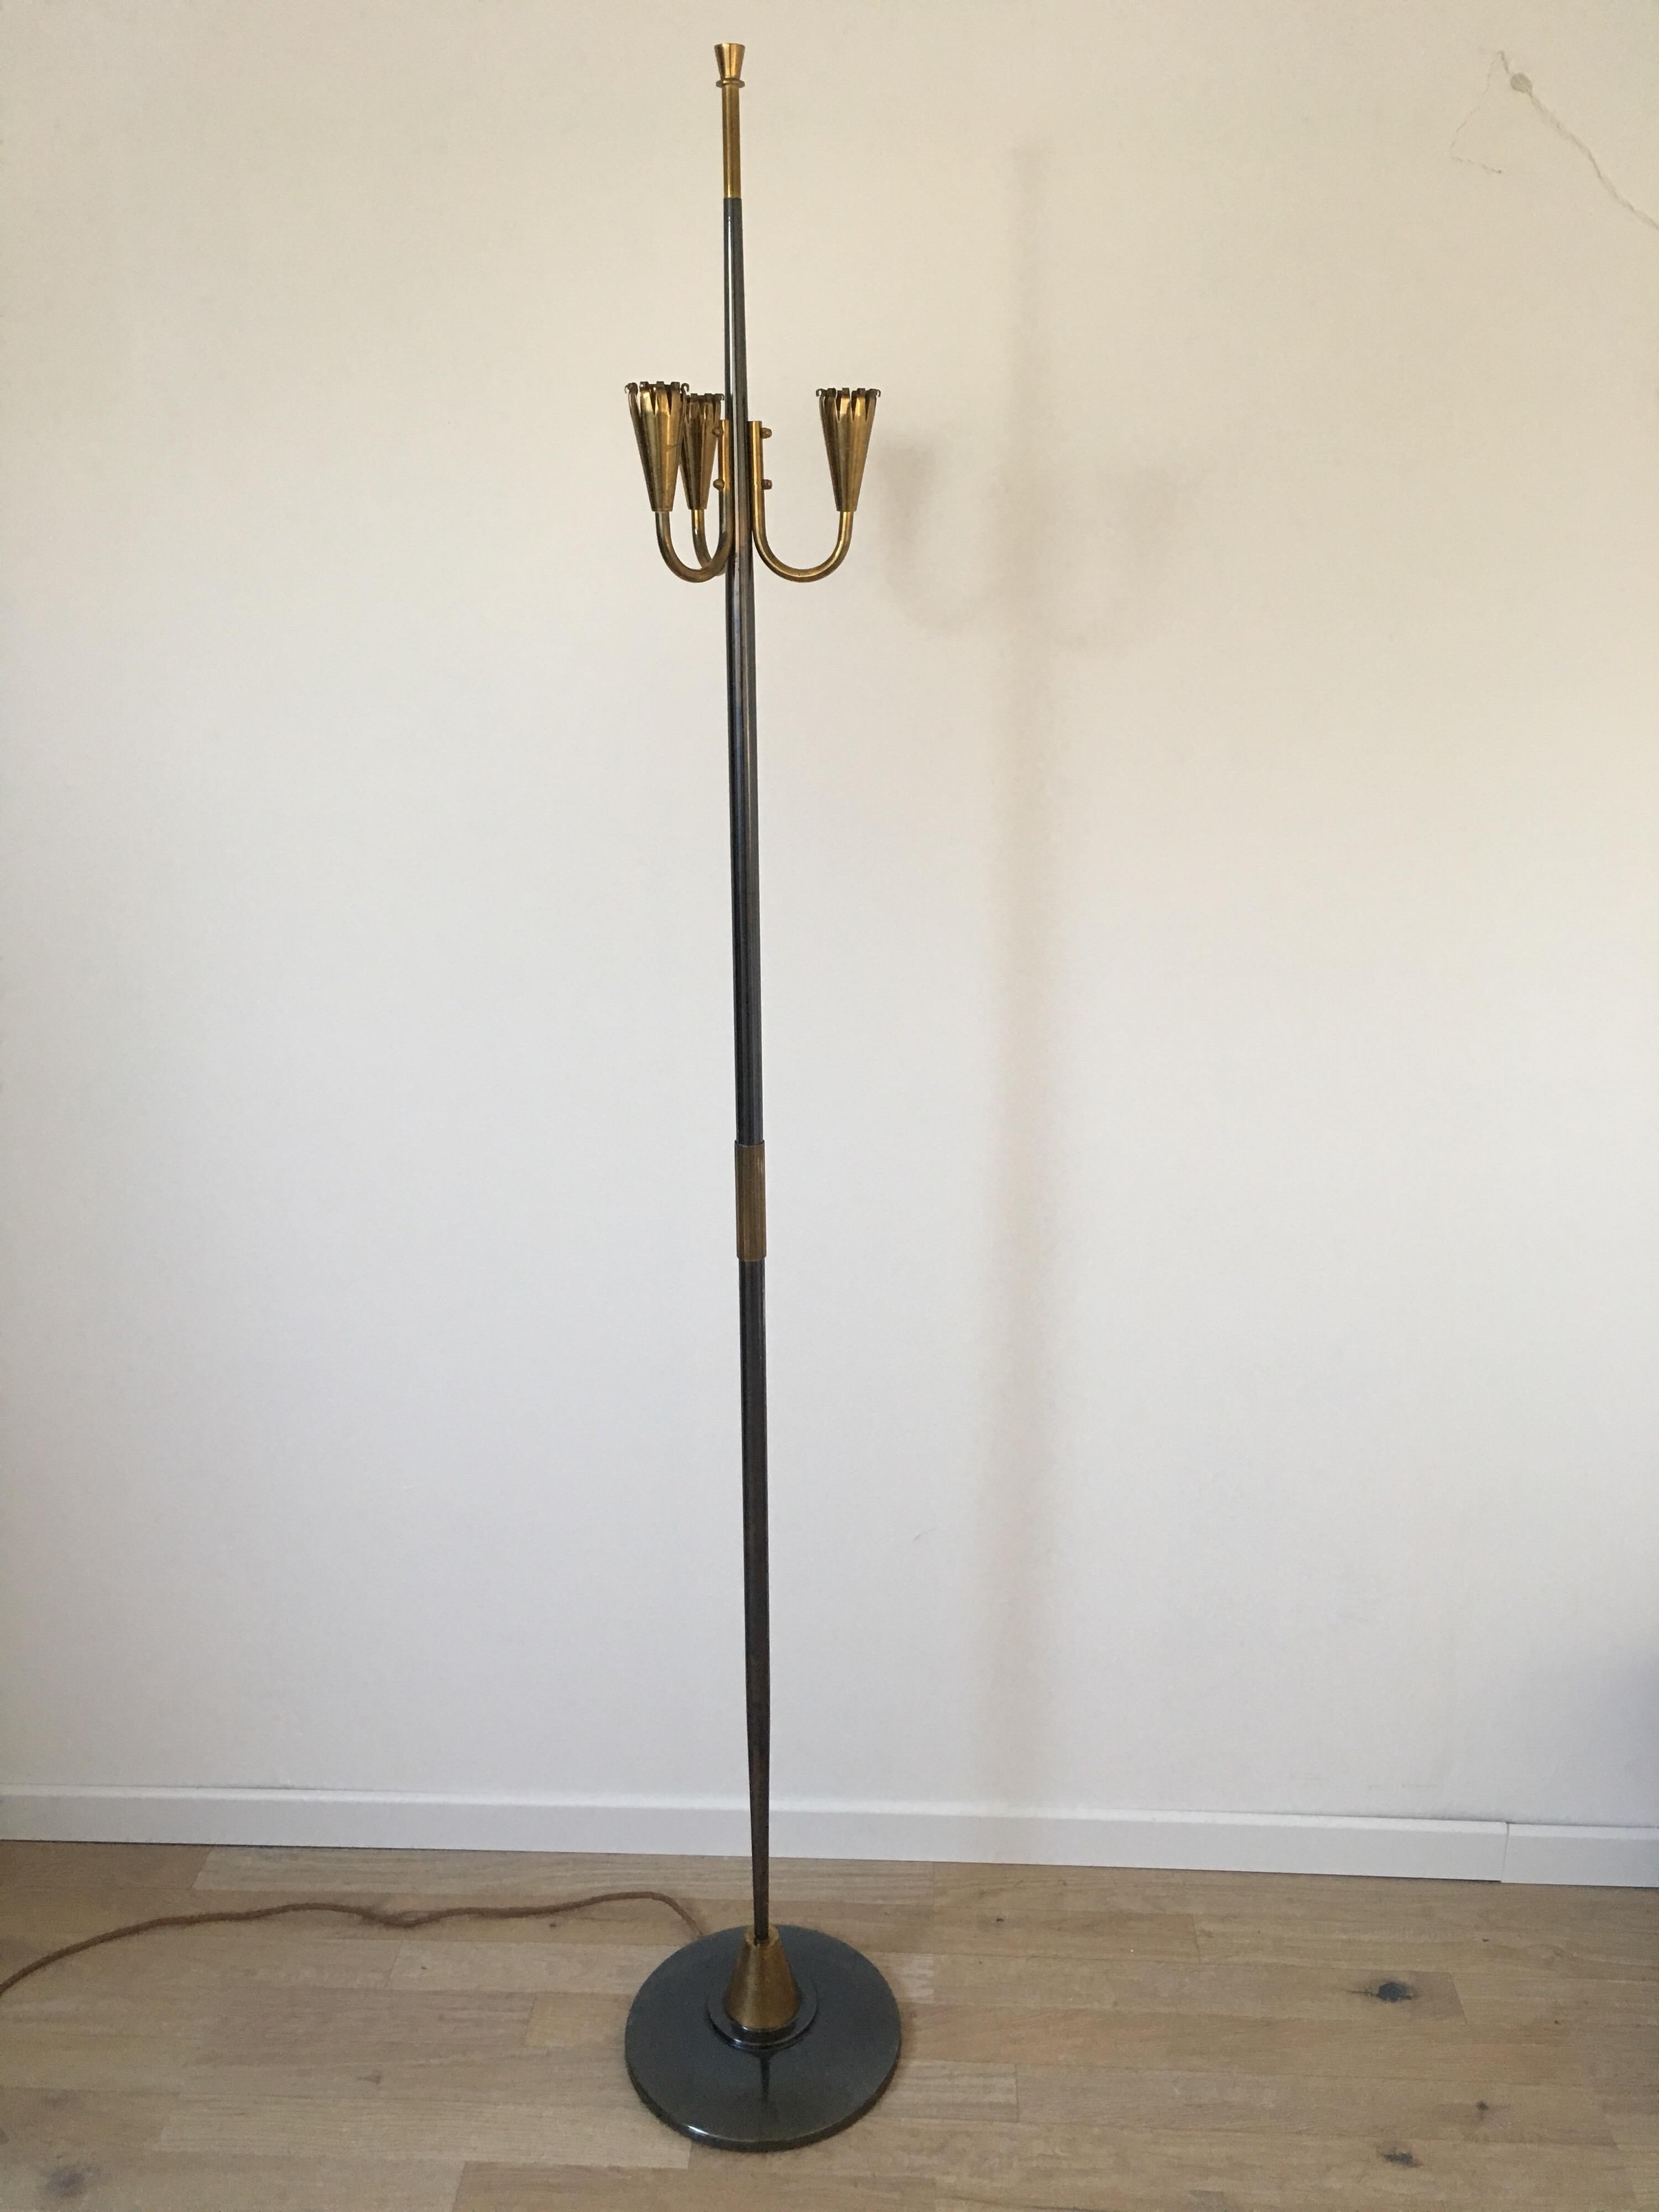 Modernist floor lamp designed by René Mathieu for Lunel in the 1950s.
The two gunmetal and gilt bronze patinas make it very elegant.
You can leave the light visible or hide it with a shade fixed with the screw located at the top of the barrel.
In